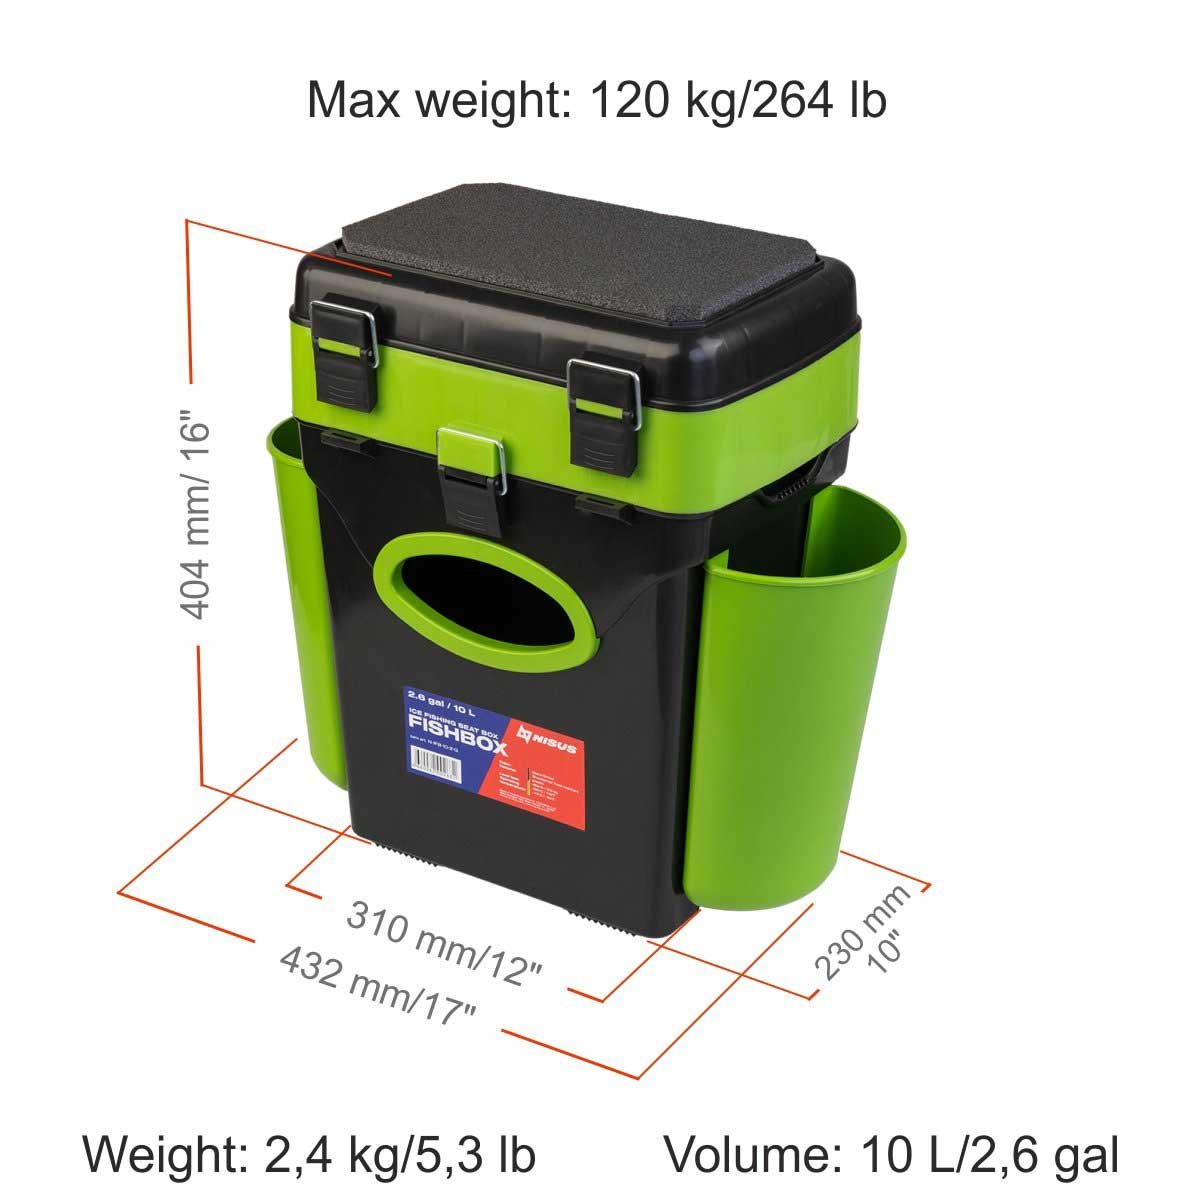 FishBox 10 liter Box for Ice Fishing with Seat could carry up to 264 pounds, it is 16 inches high, 17 inches long and 10 inches wide, weighing 5.3 lbs